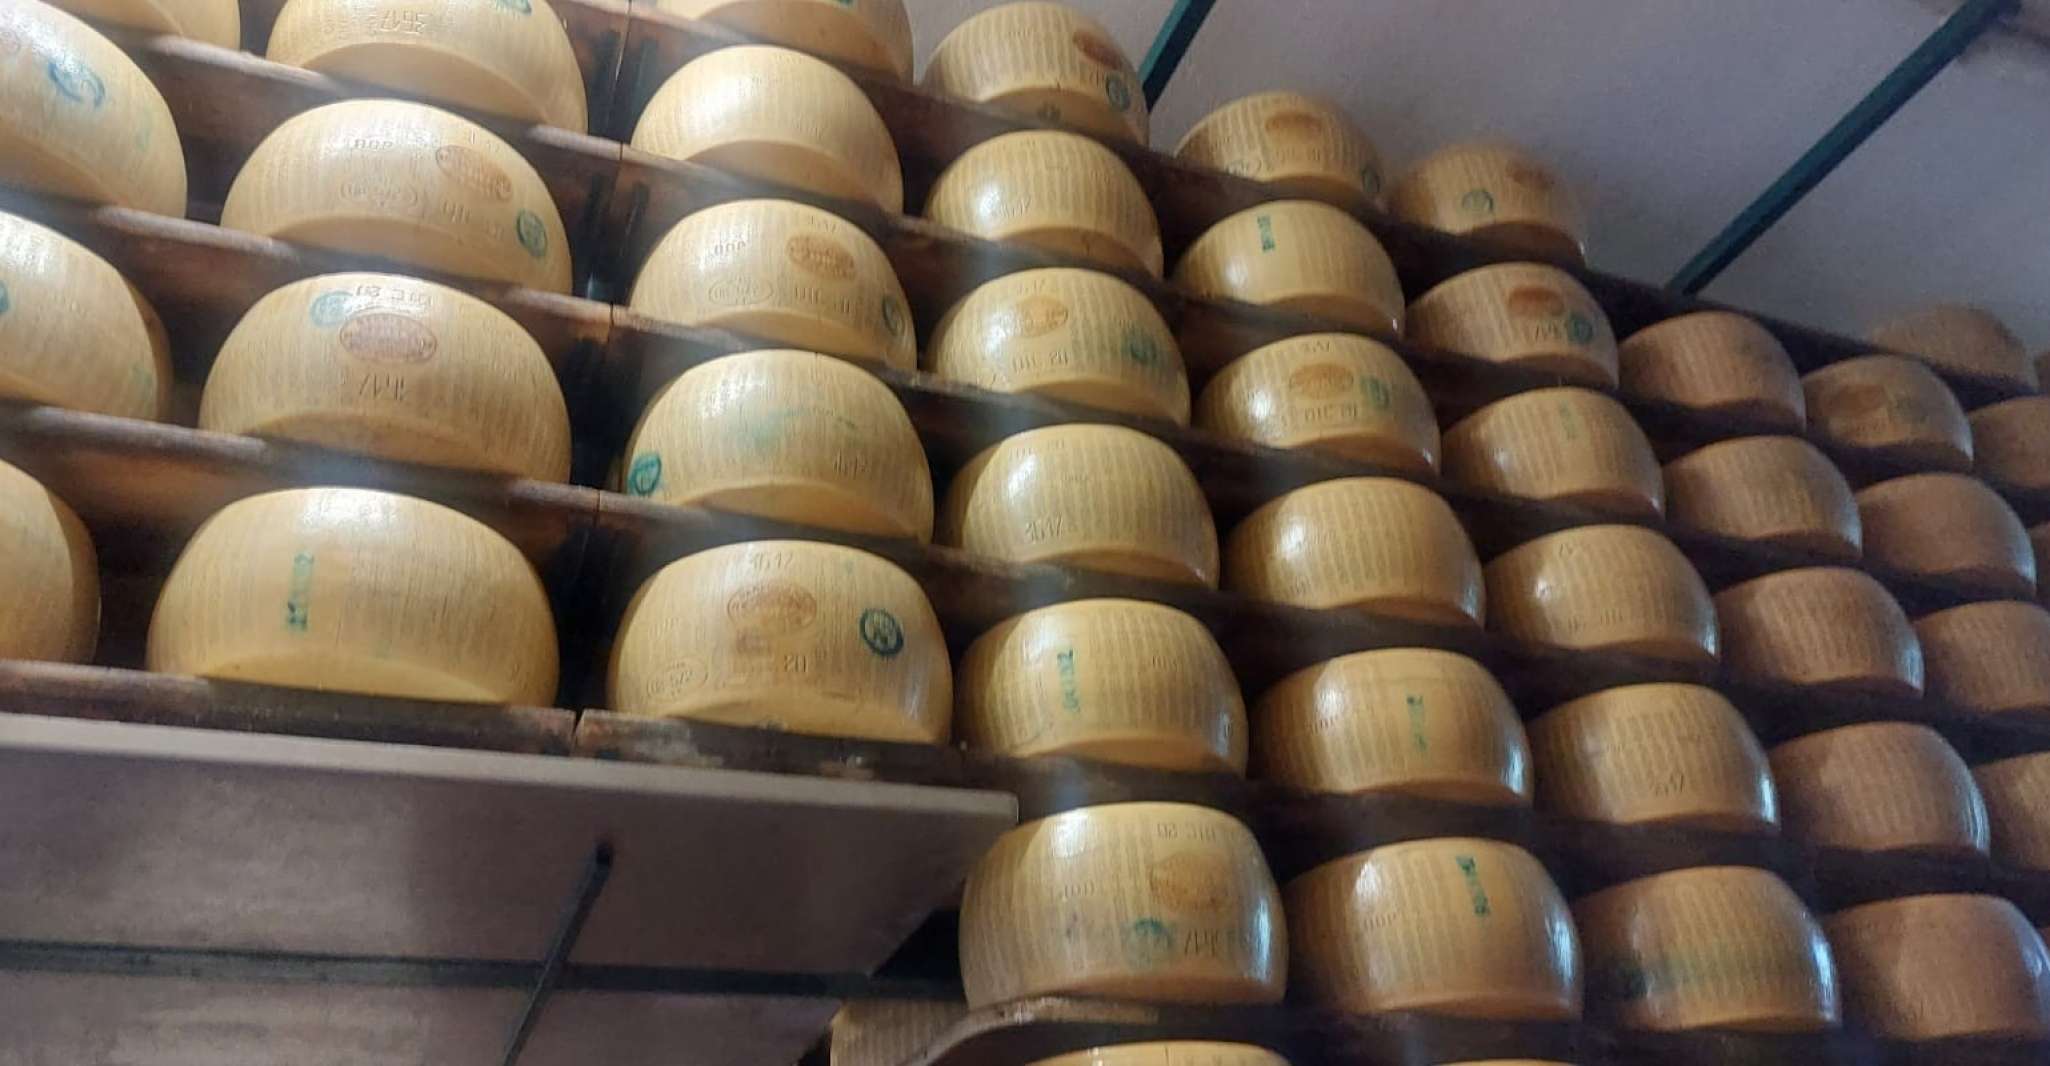 Rosola, Parmigiano Dairy Farm Visit with Cheese Tasting - Housity